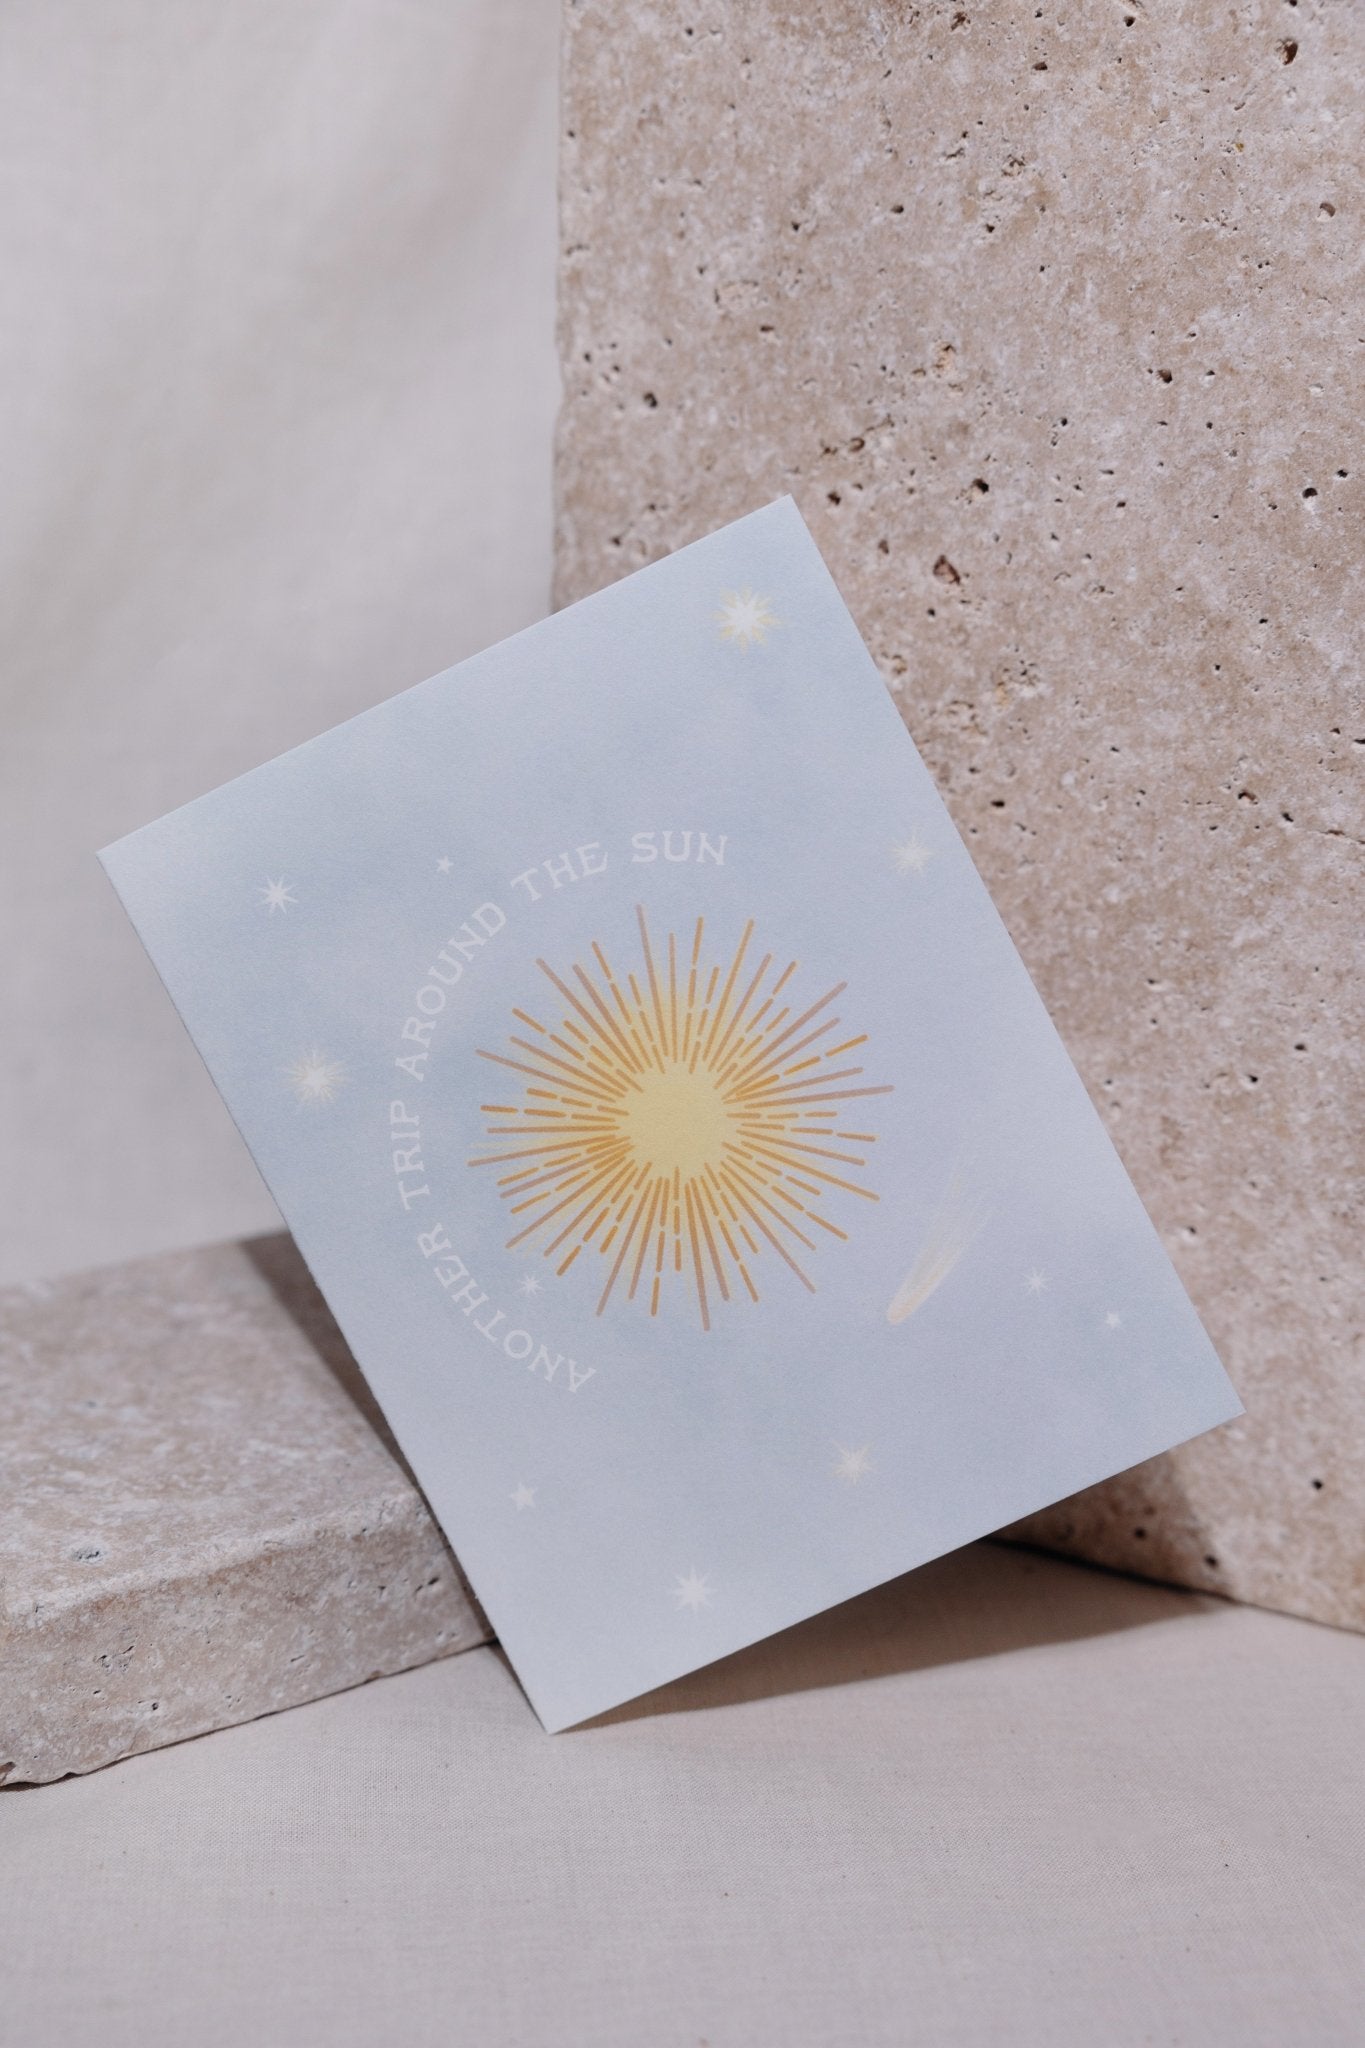 Greeting card with a place blue background, stars, and the words "Another Trip Around the Sun" circling around a yellow sun. Card is propped up on a beige background and is leaning at an angle against a light gray stone.